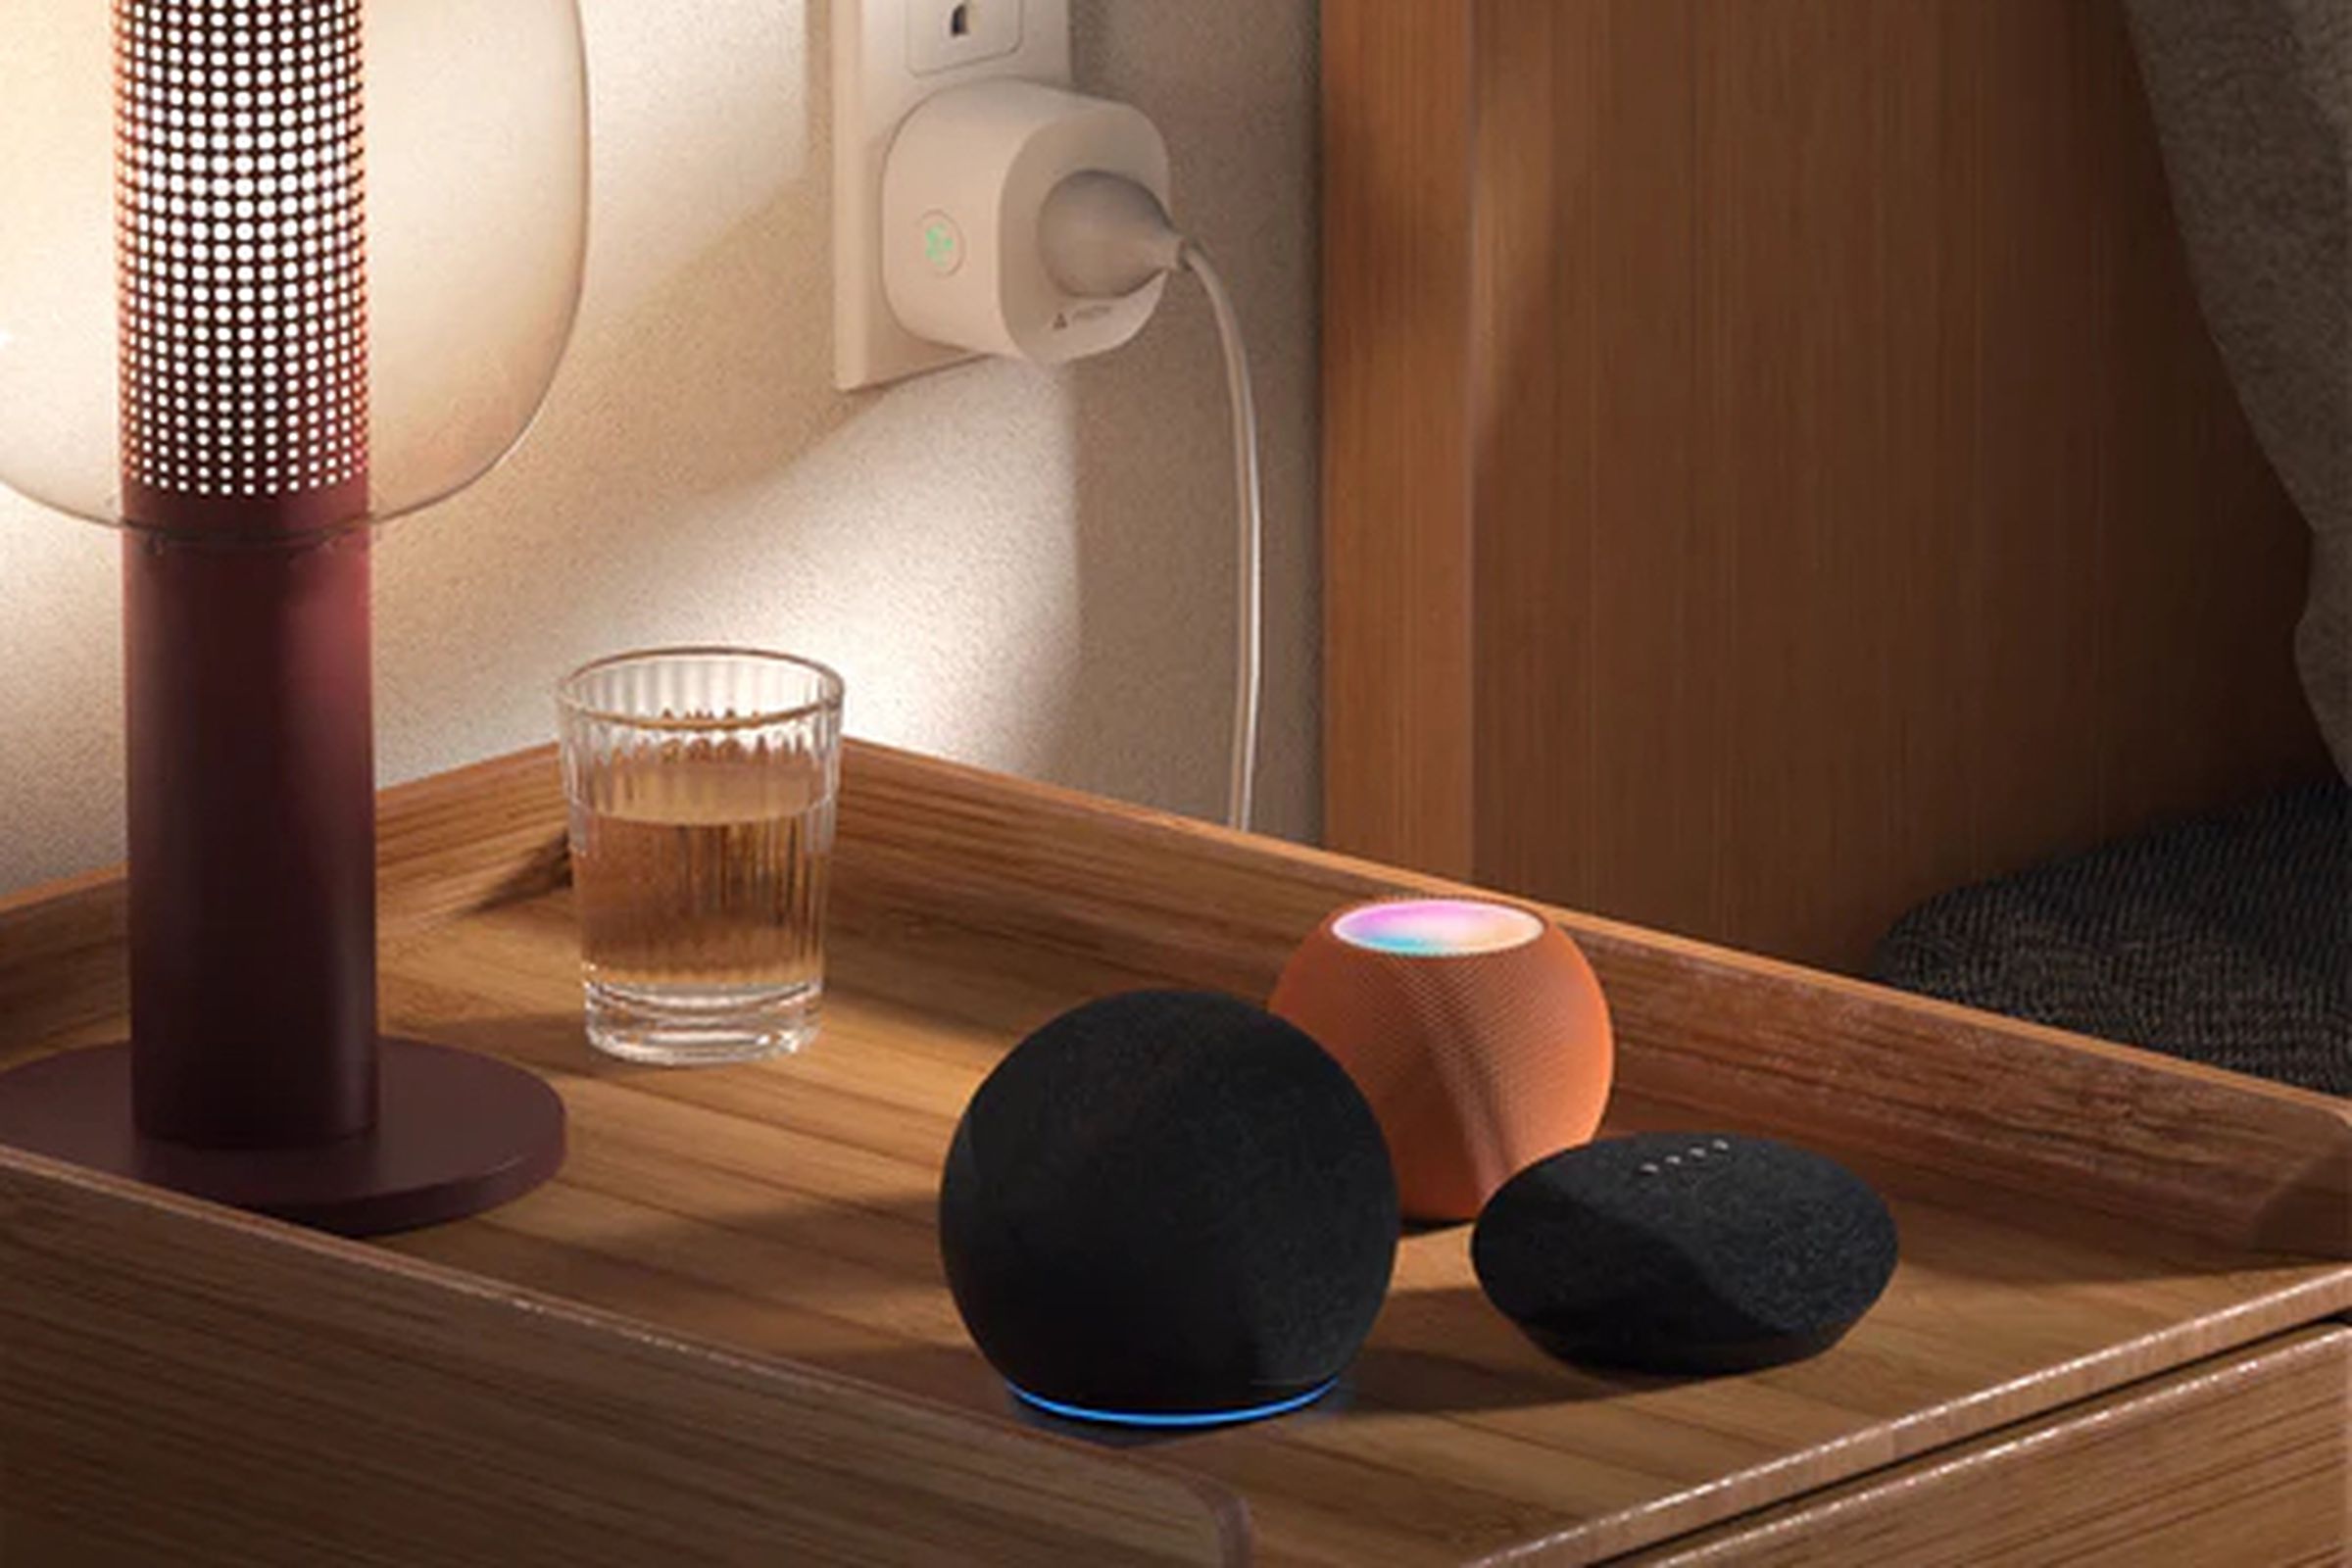 A lamp plugged into a smart plug next to three smart speakers.